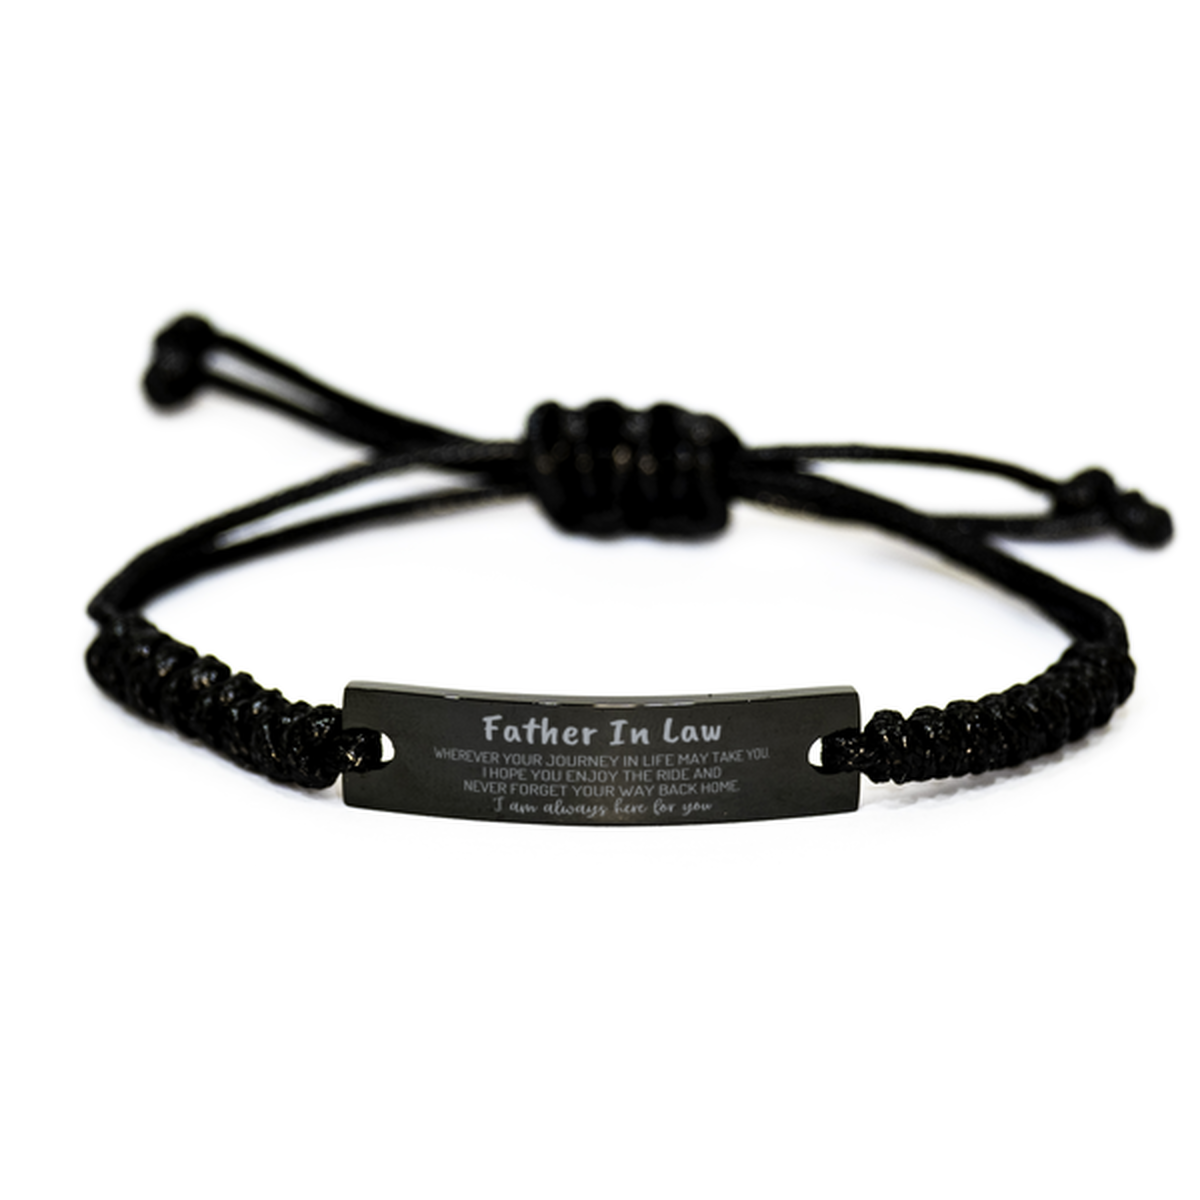 Father In Law wherever your journey in life may take you, I am always here for you Father In Law Black Rope Bracelet, Awesome Christmas Gifts For Father In Law, Father In Law Birthday Gifts for Men Women Family Loved One